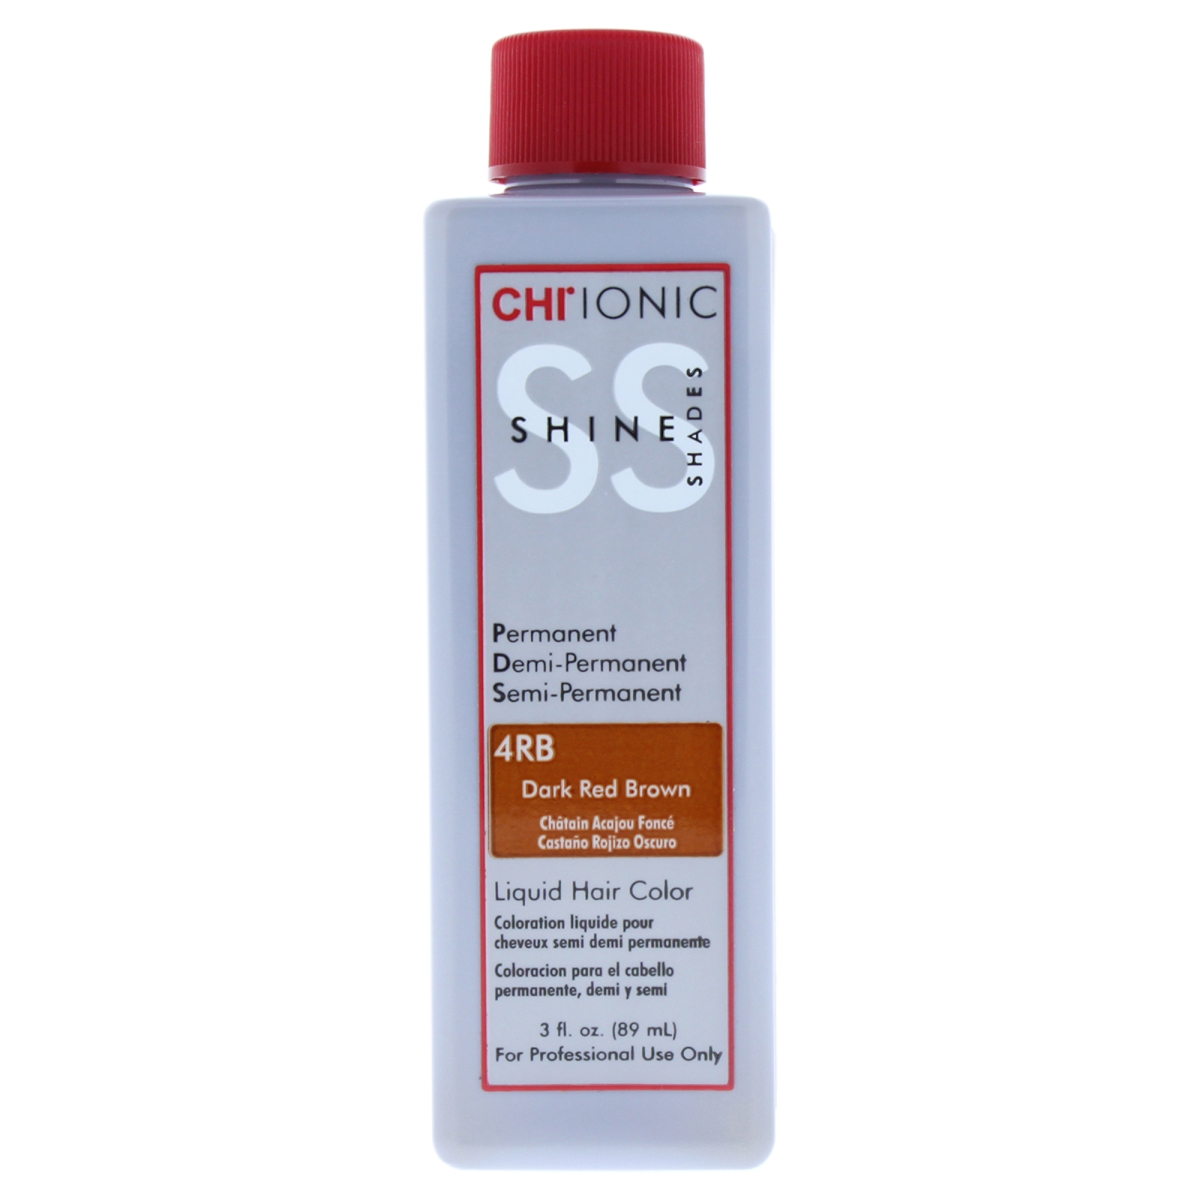 I0084012 Ionic Shine Shades Liquid Hair Color For Unisex - 4rb Dark Red Brown - 3 Oz